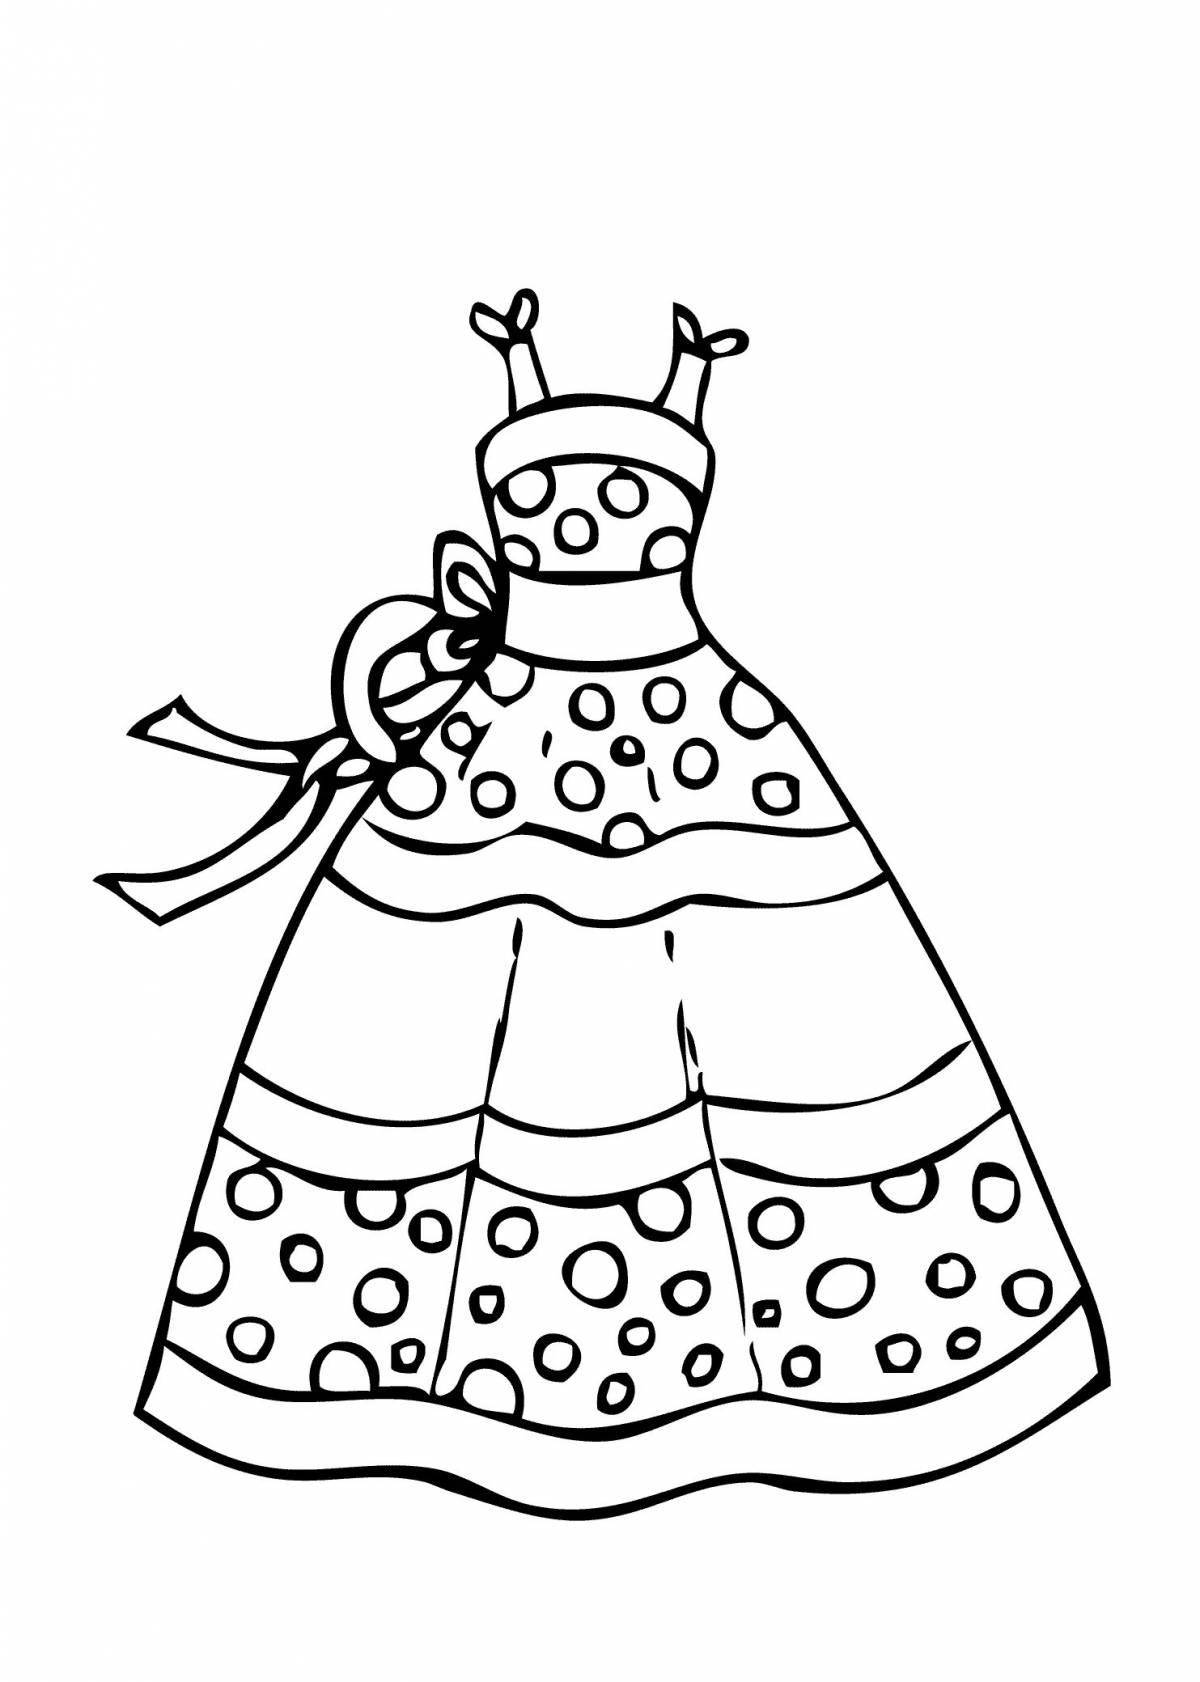 Coloring page riotous dress for kids